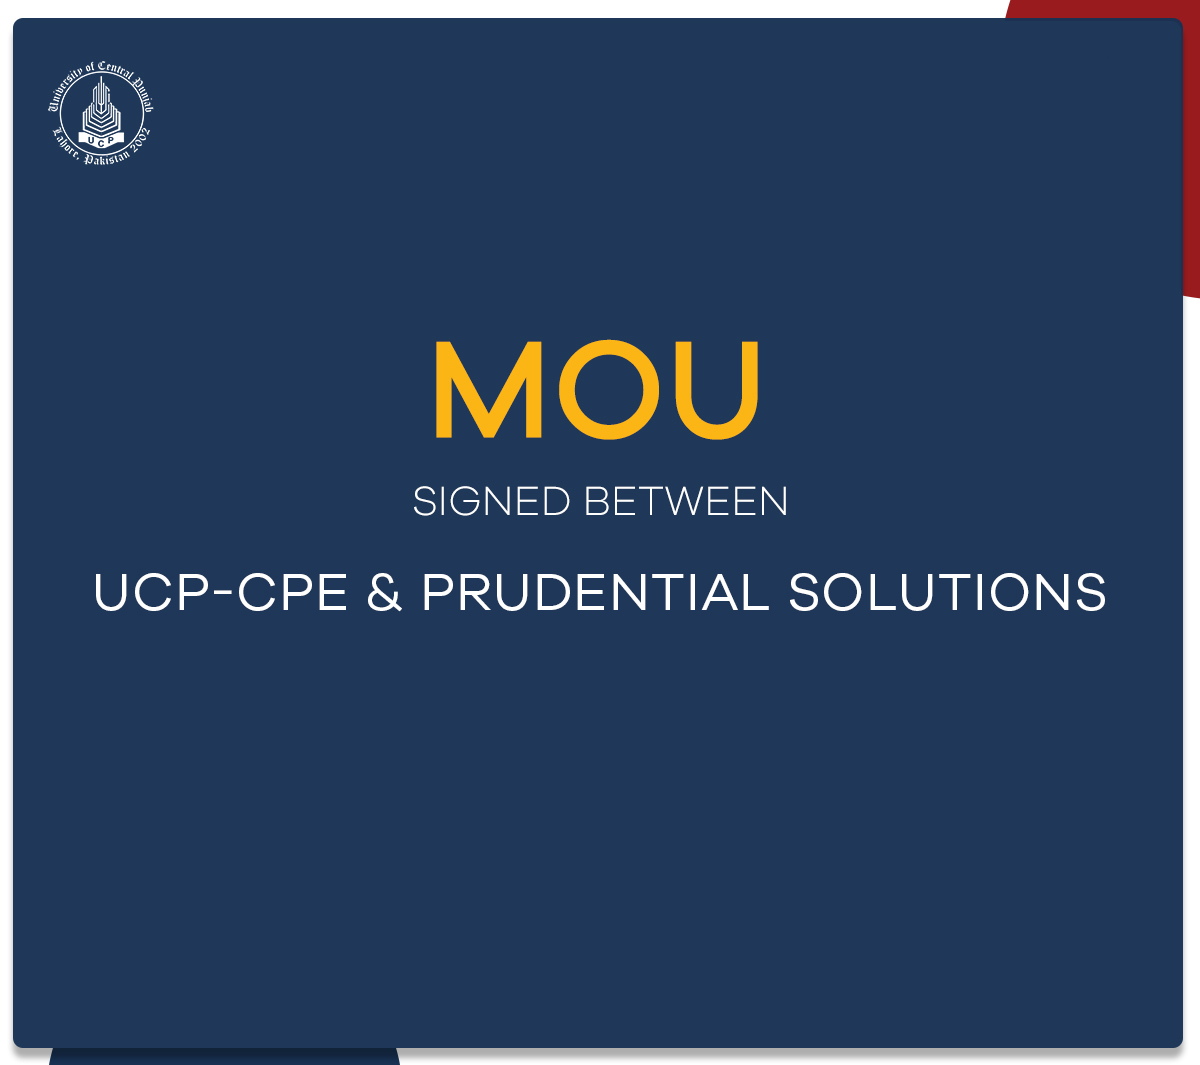 MoU signed by UCP-CPE & Prudential Solutions